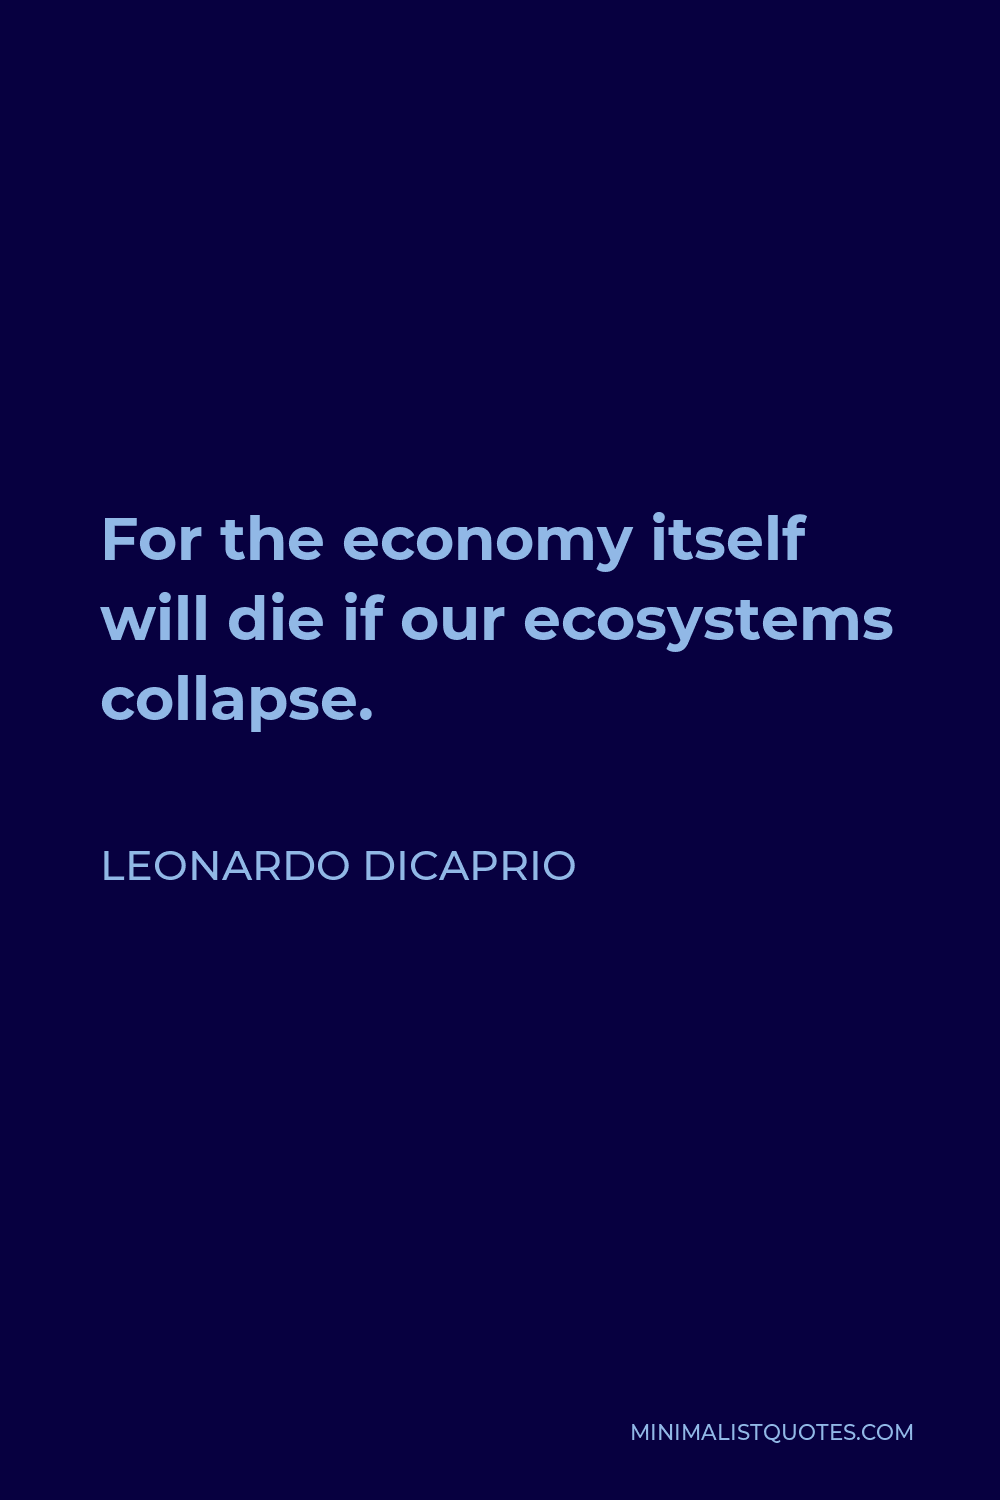 Leonardo DiCaprio Quote - For the economy itself will die if our ecosystems collapse.